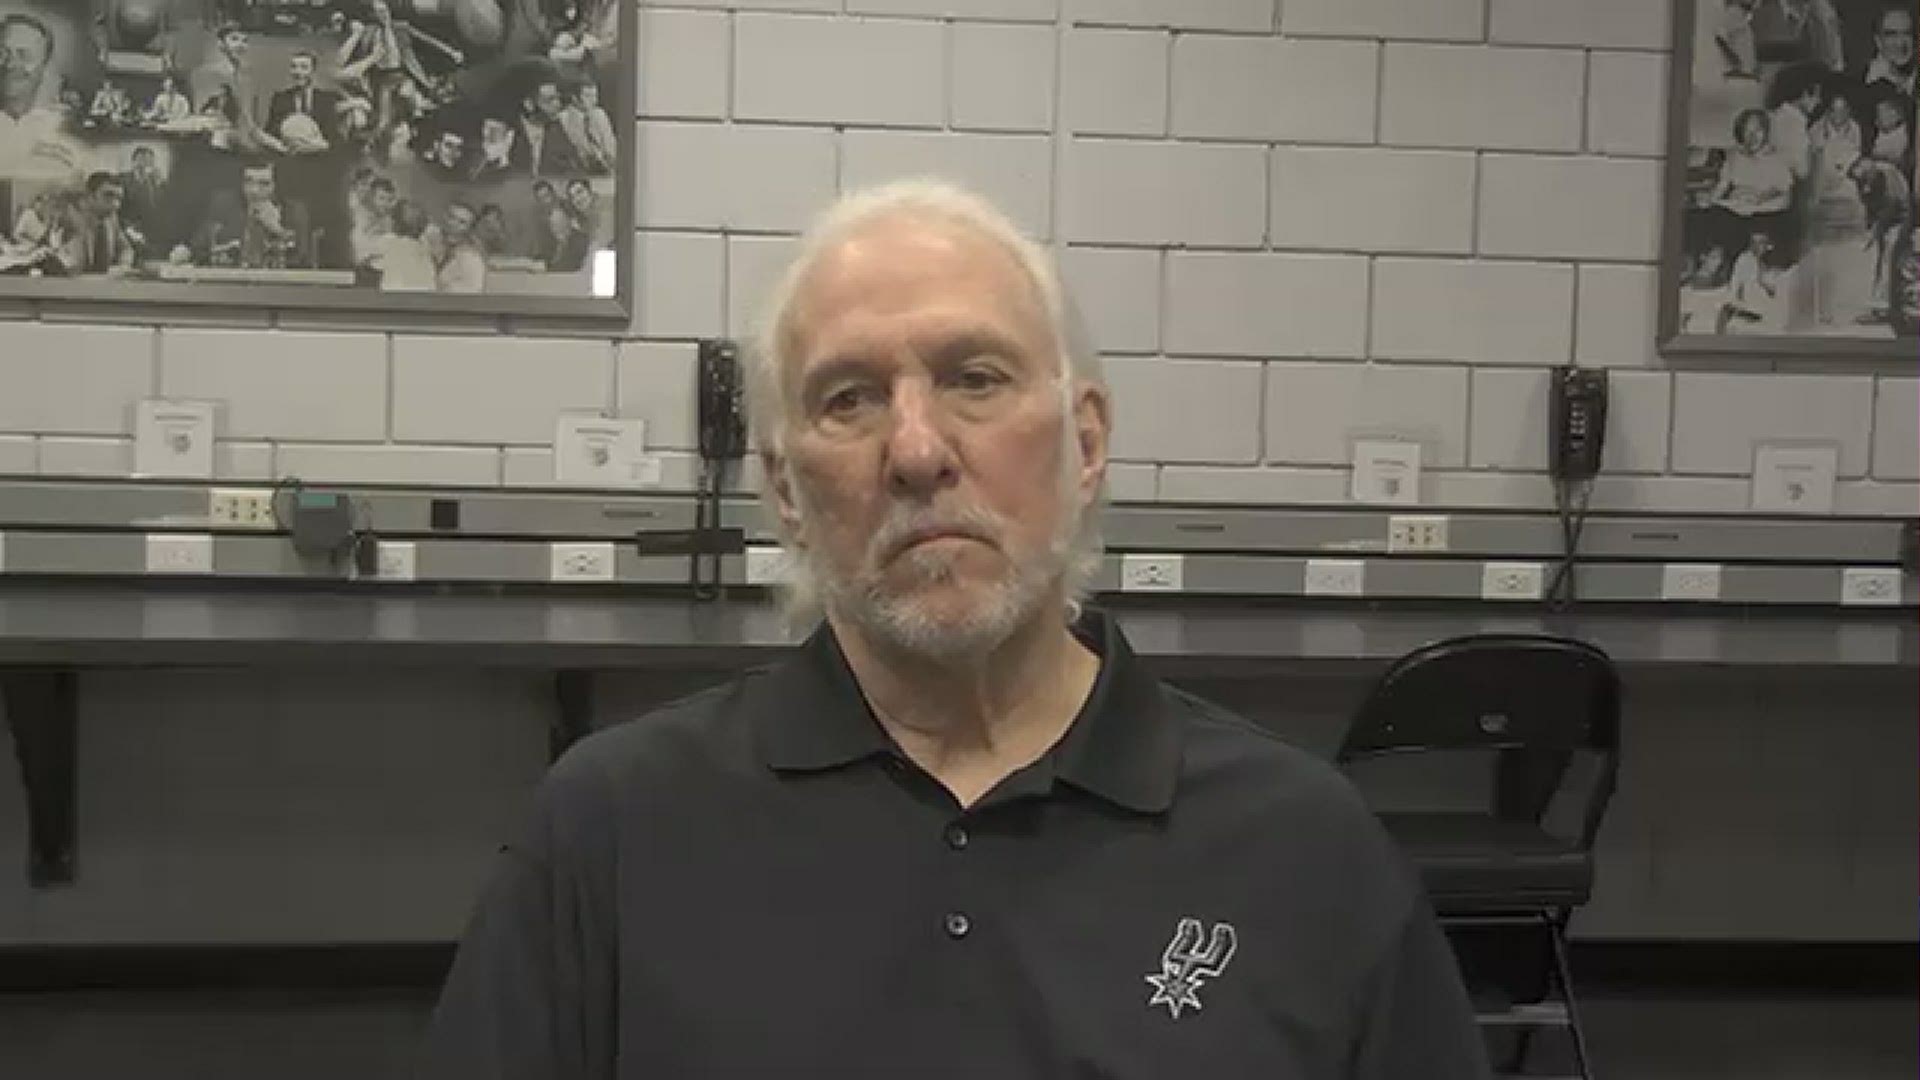 San Antonio Spurs head coach Gregg Popovich speaks to reporters following his team's 125-104 road victory over the Portland Trail Blazers.